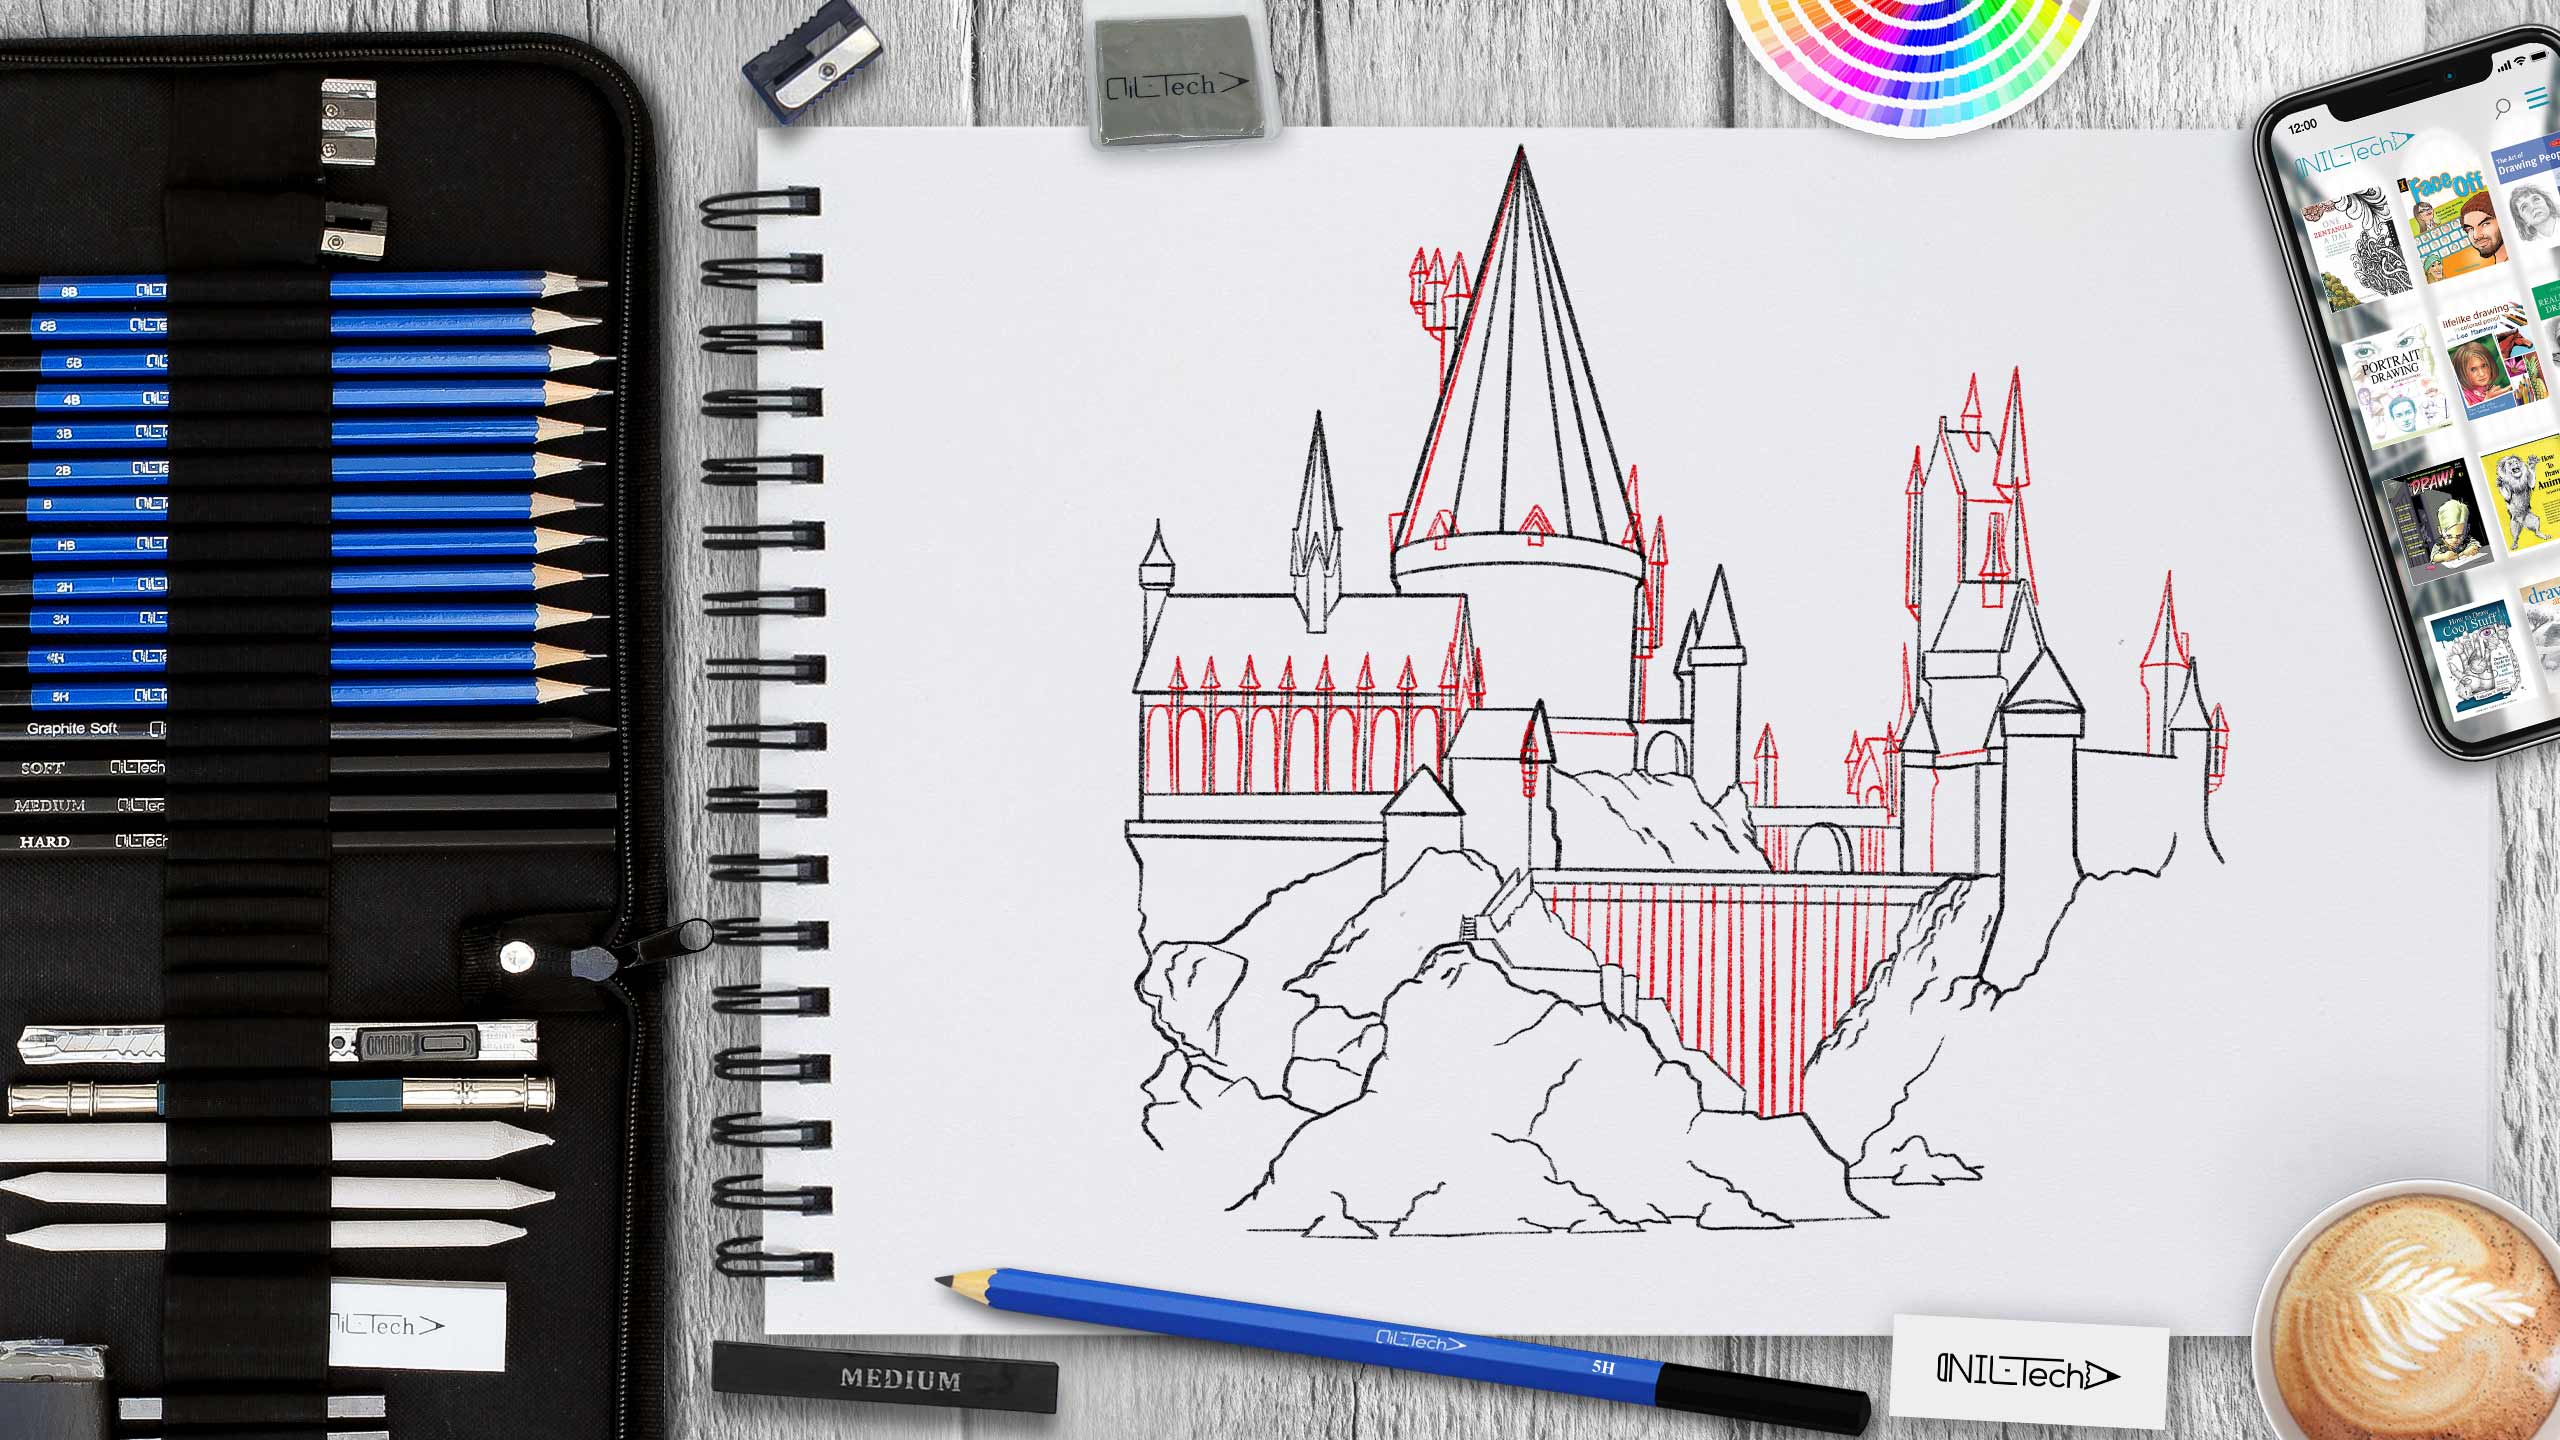 40 Easy Harry Potter Drawings Ideas - Hobby Lesson | Harry potter drawings, Harry  potter sketch, Harry potter art drawings